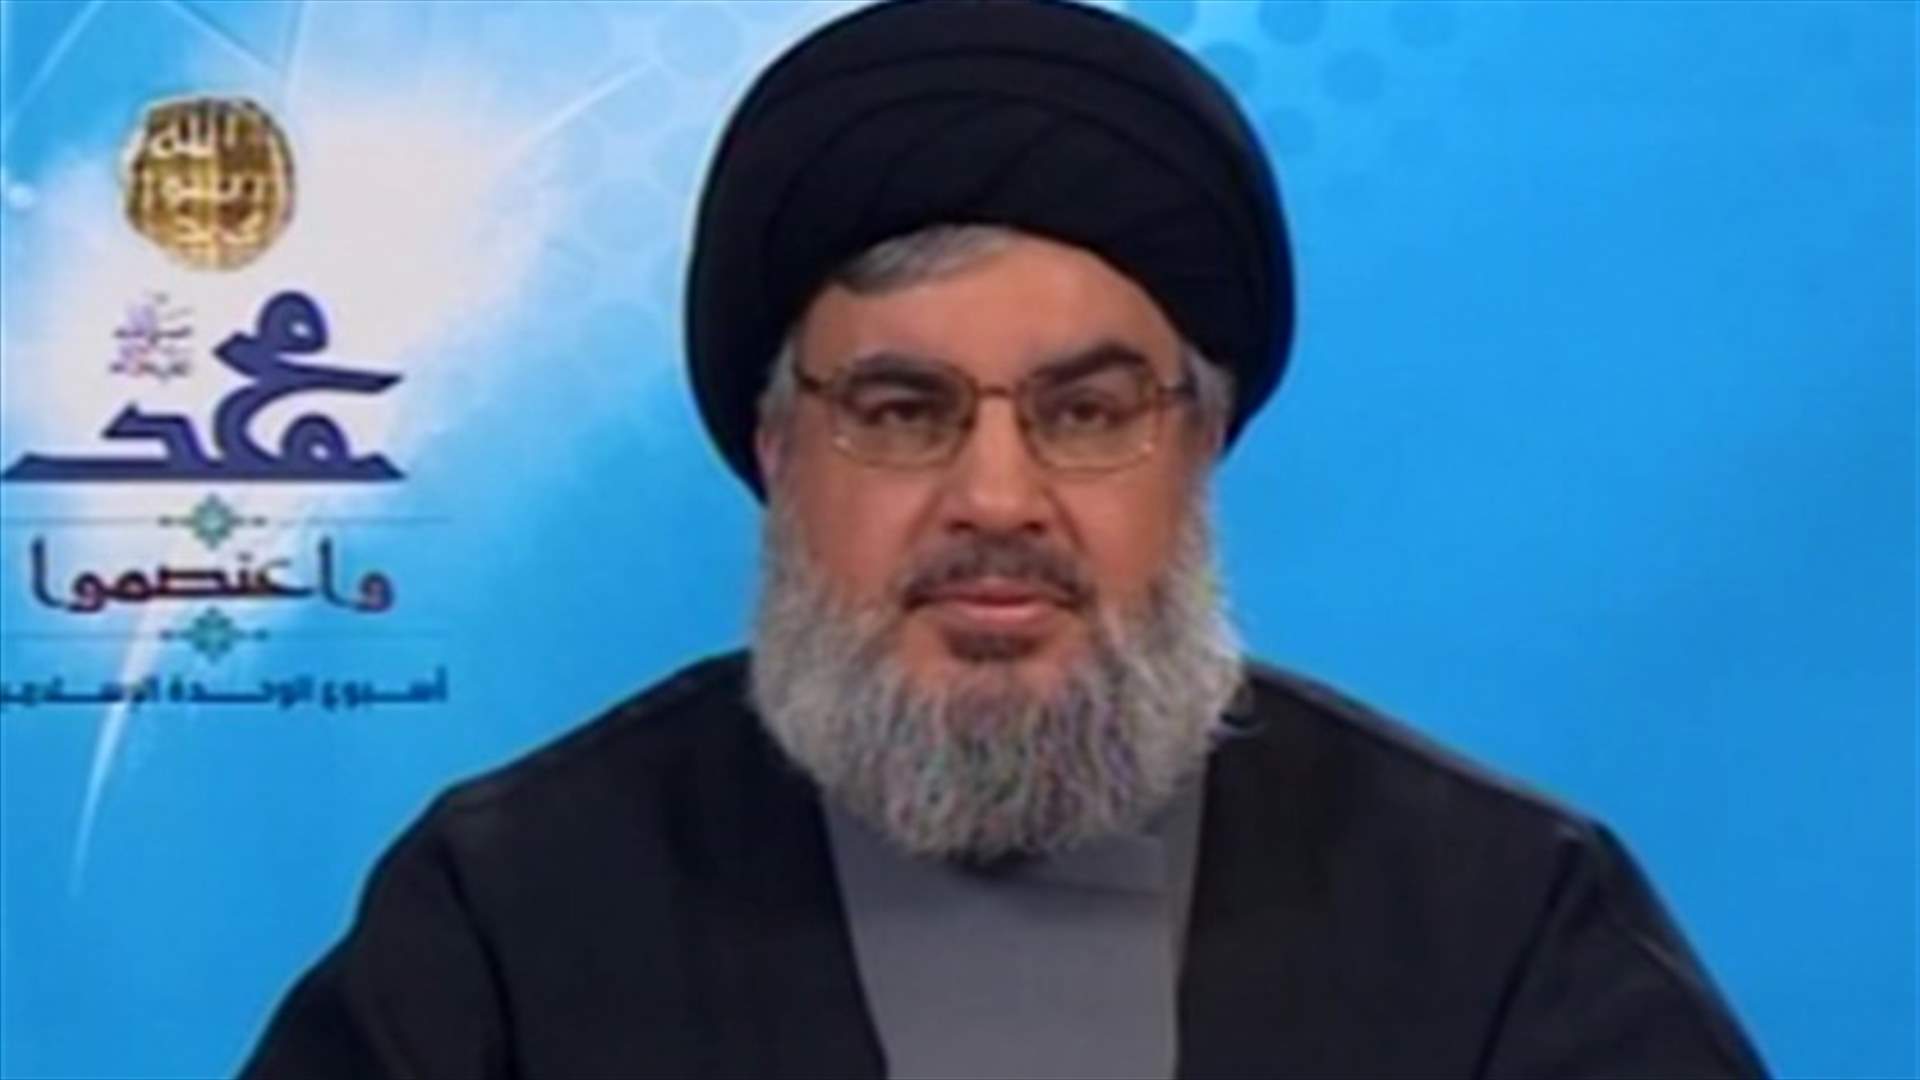 Nasrallah: Iran extends support to us, does not dictate us 